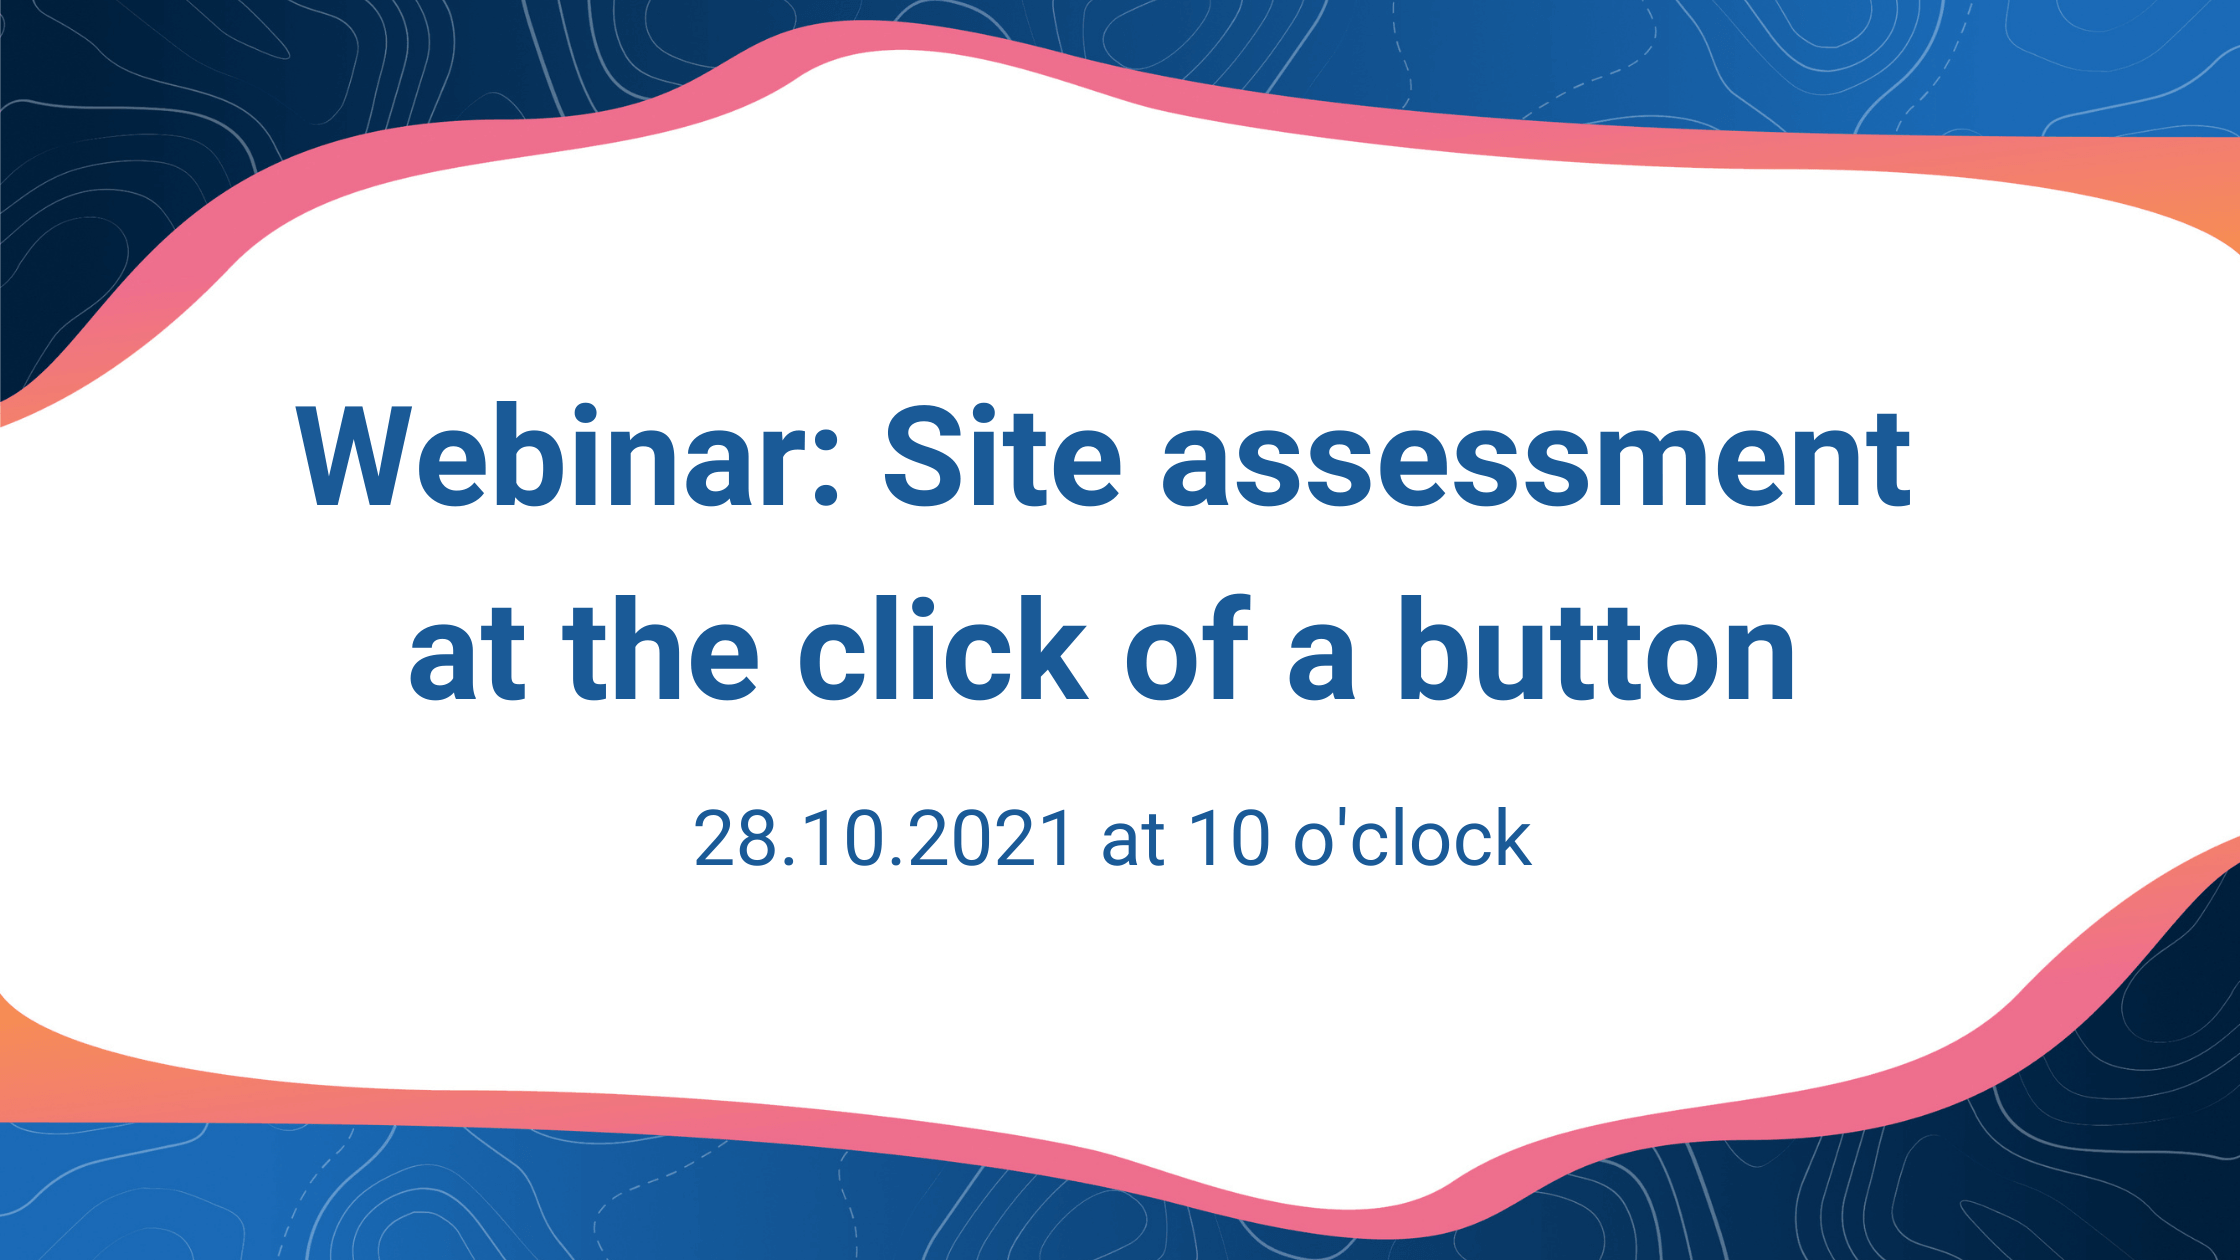 Webinar: Site assessment at the click of a button